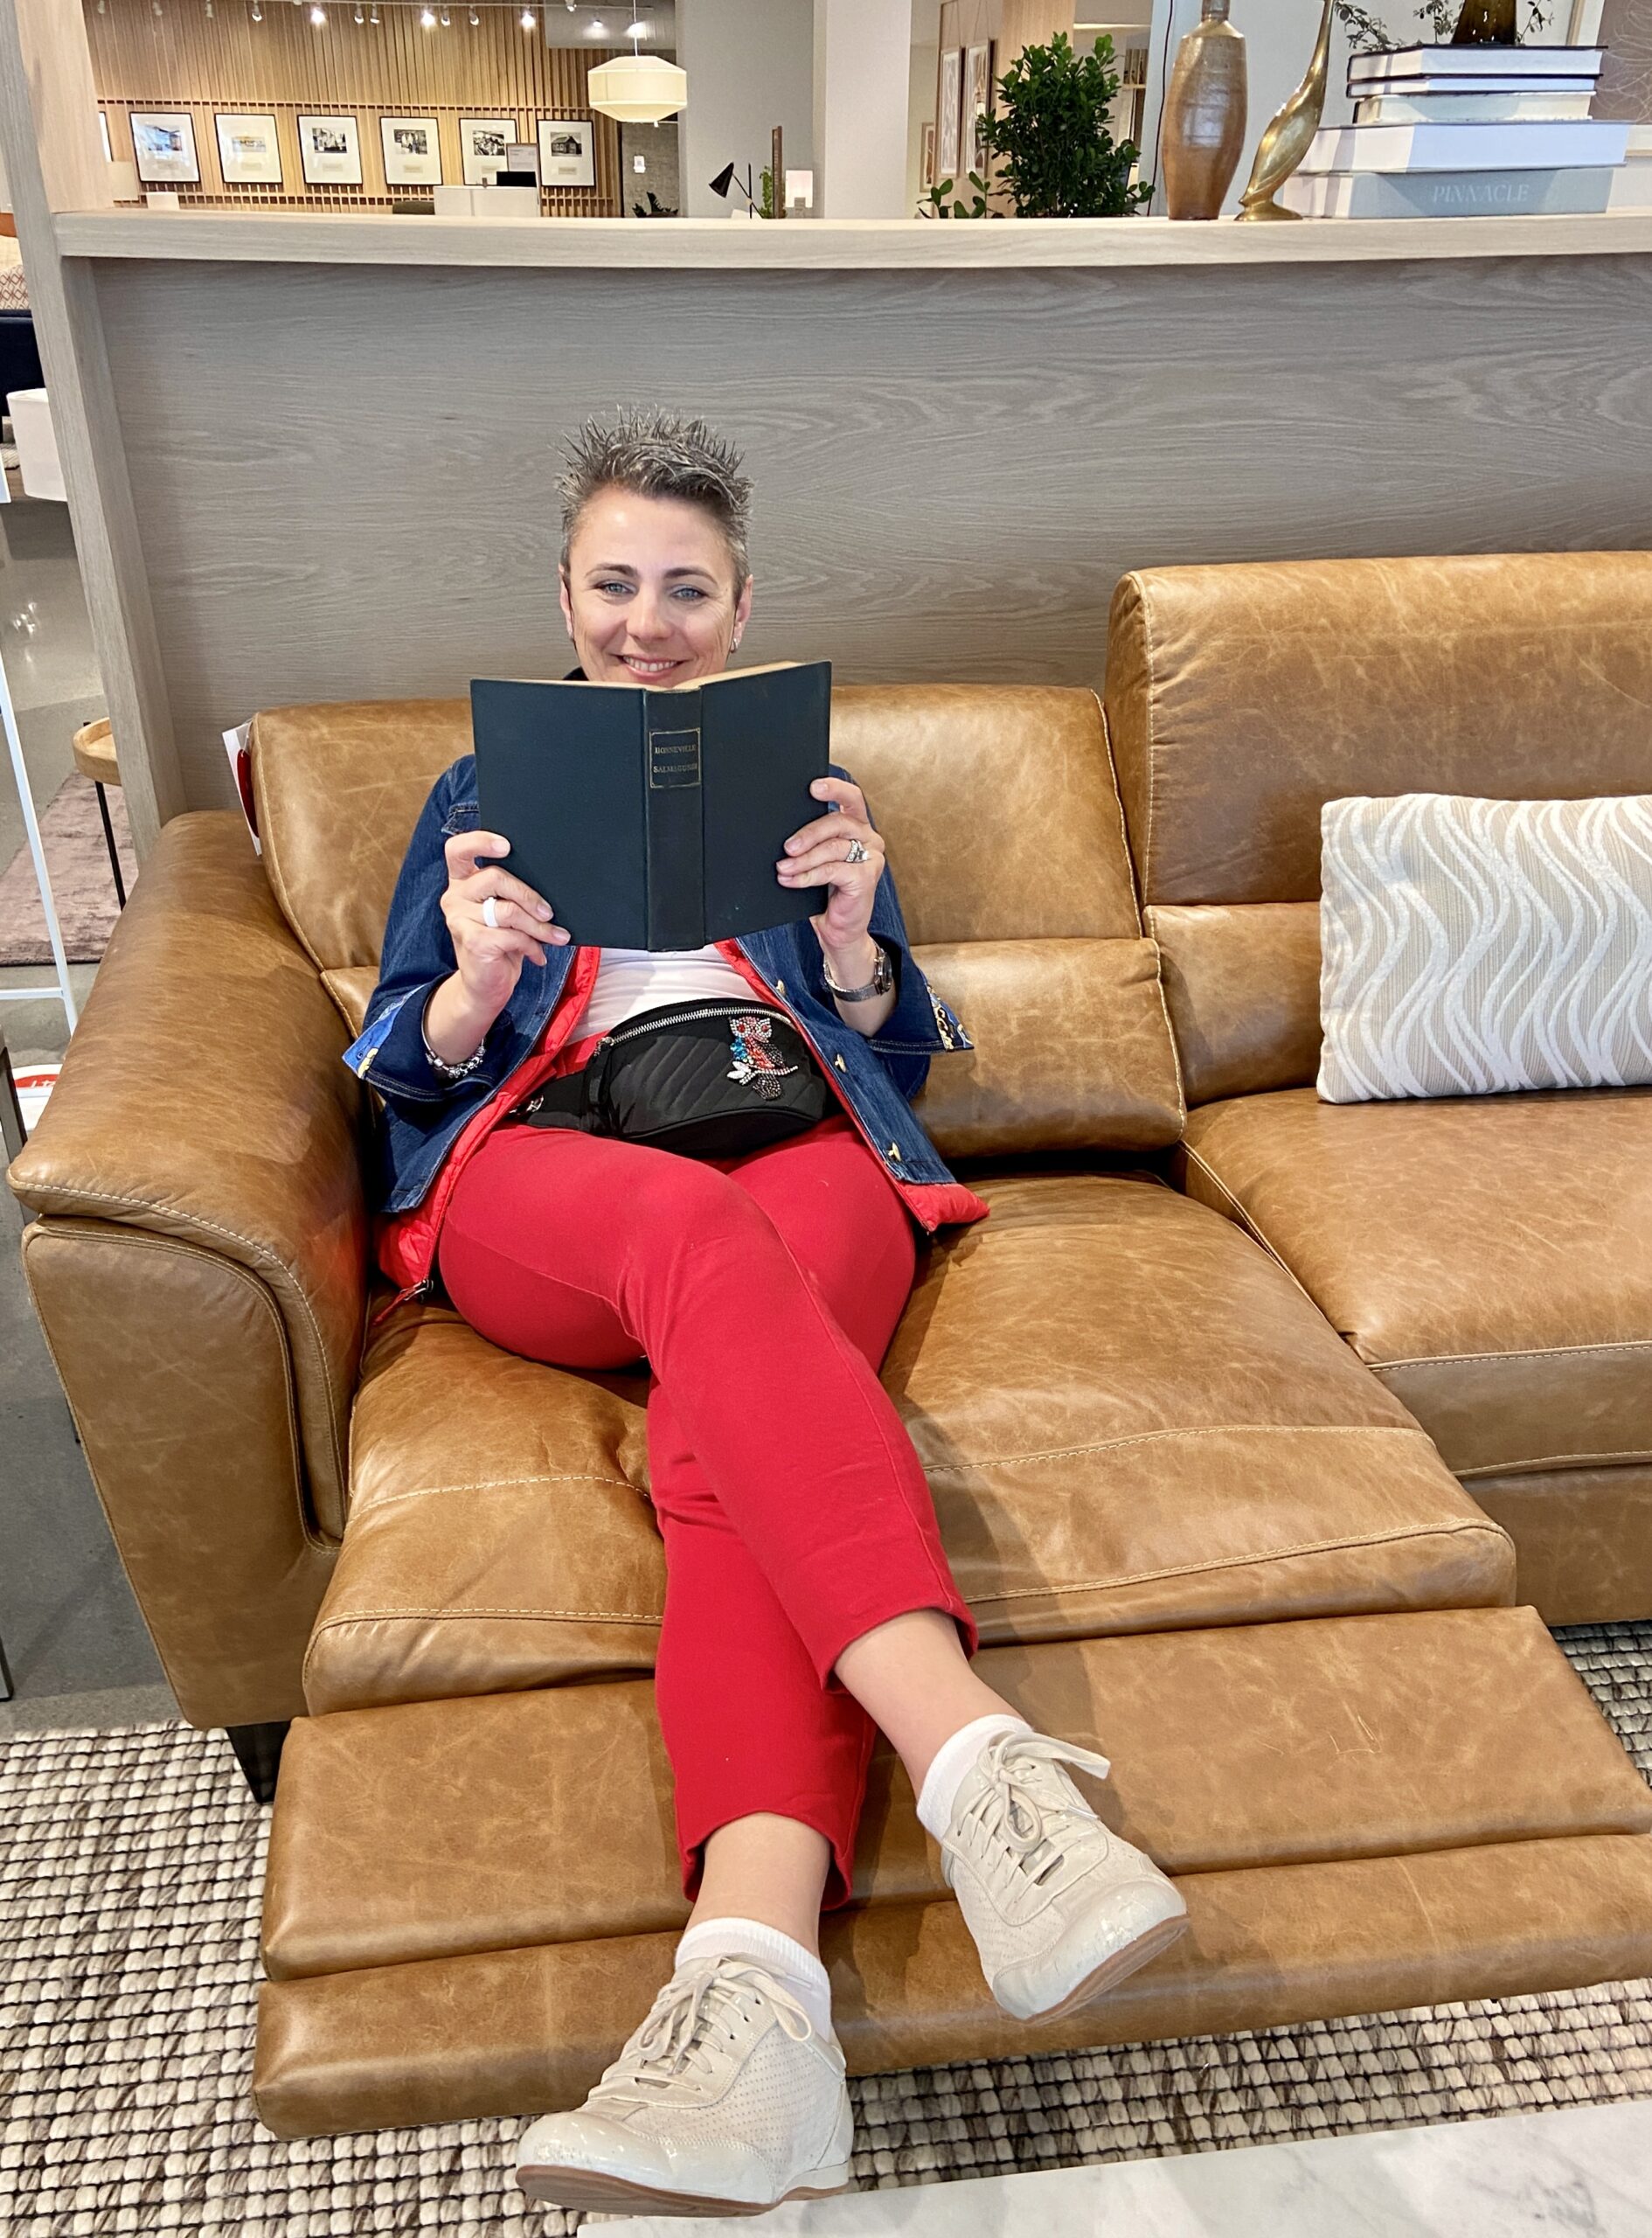 LK Design High PointMarket visit person with a book on reclining sofa